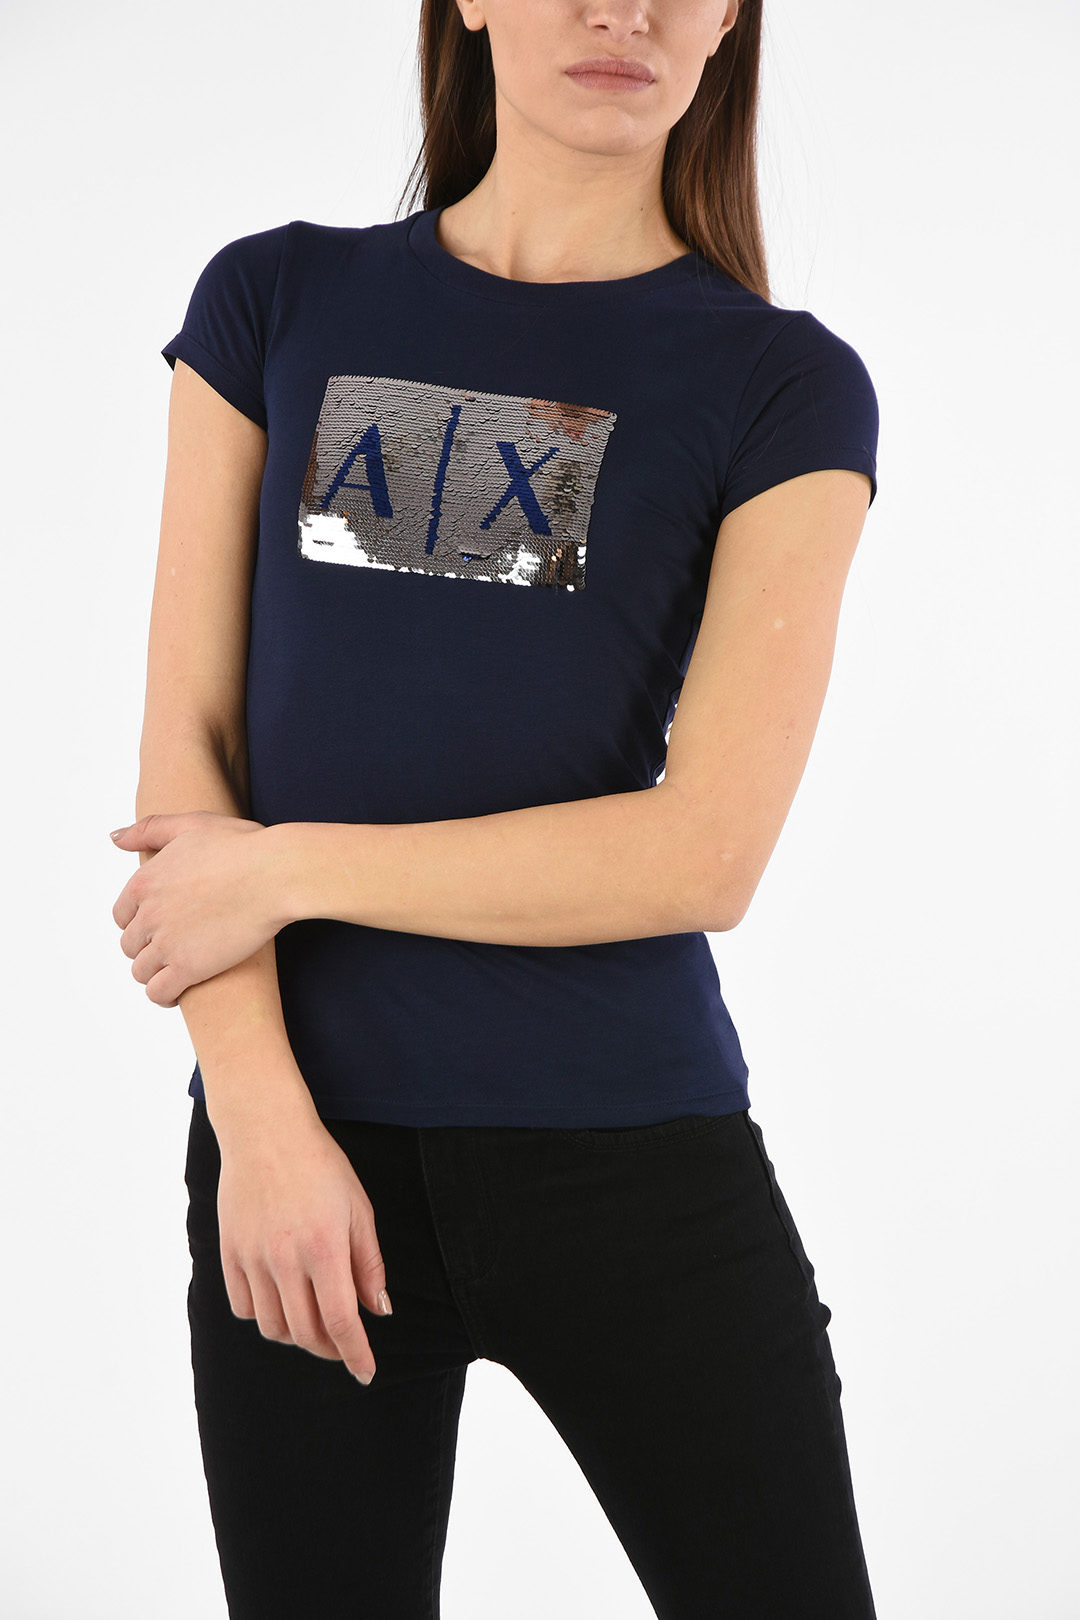 Armani ARMANI EXCHANGE Sequined T-shirt women - Glamood Outlet